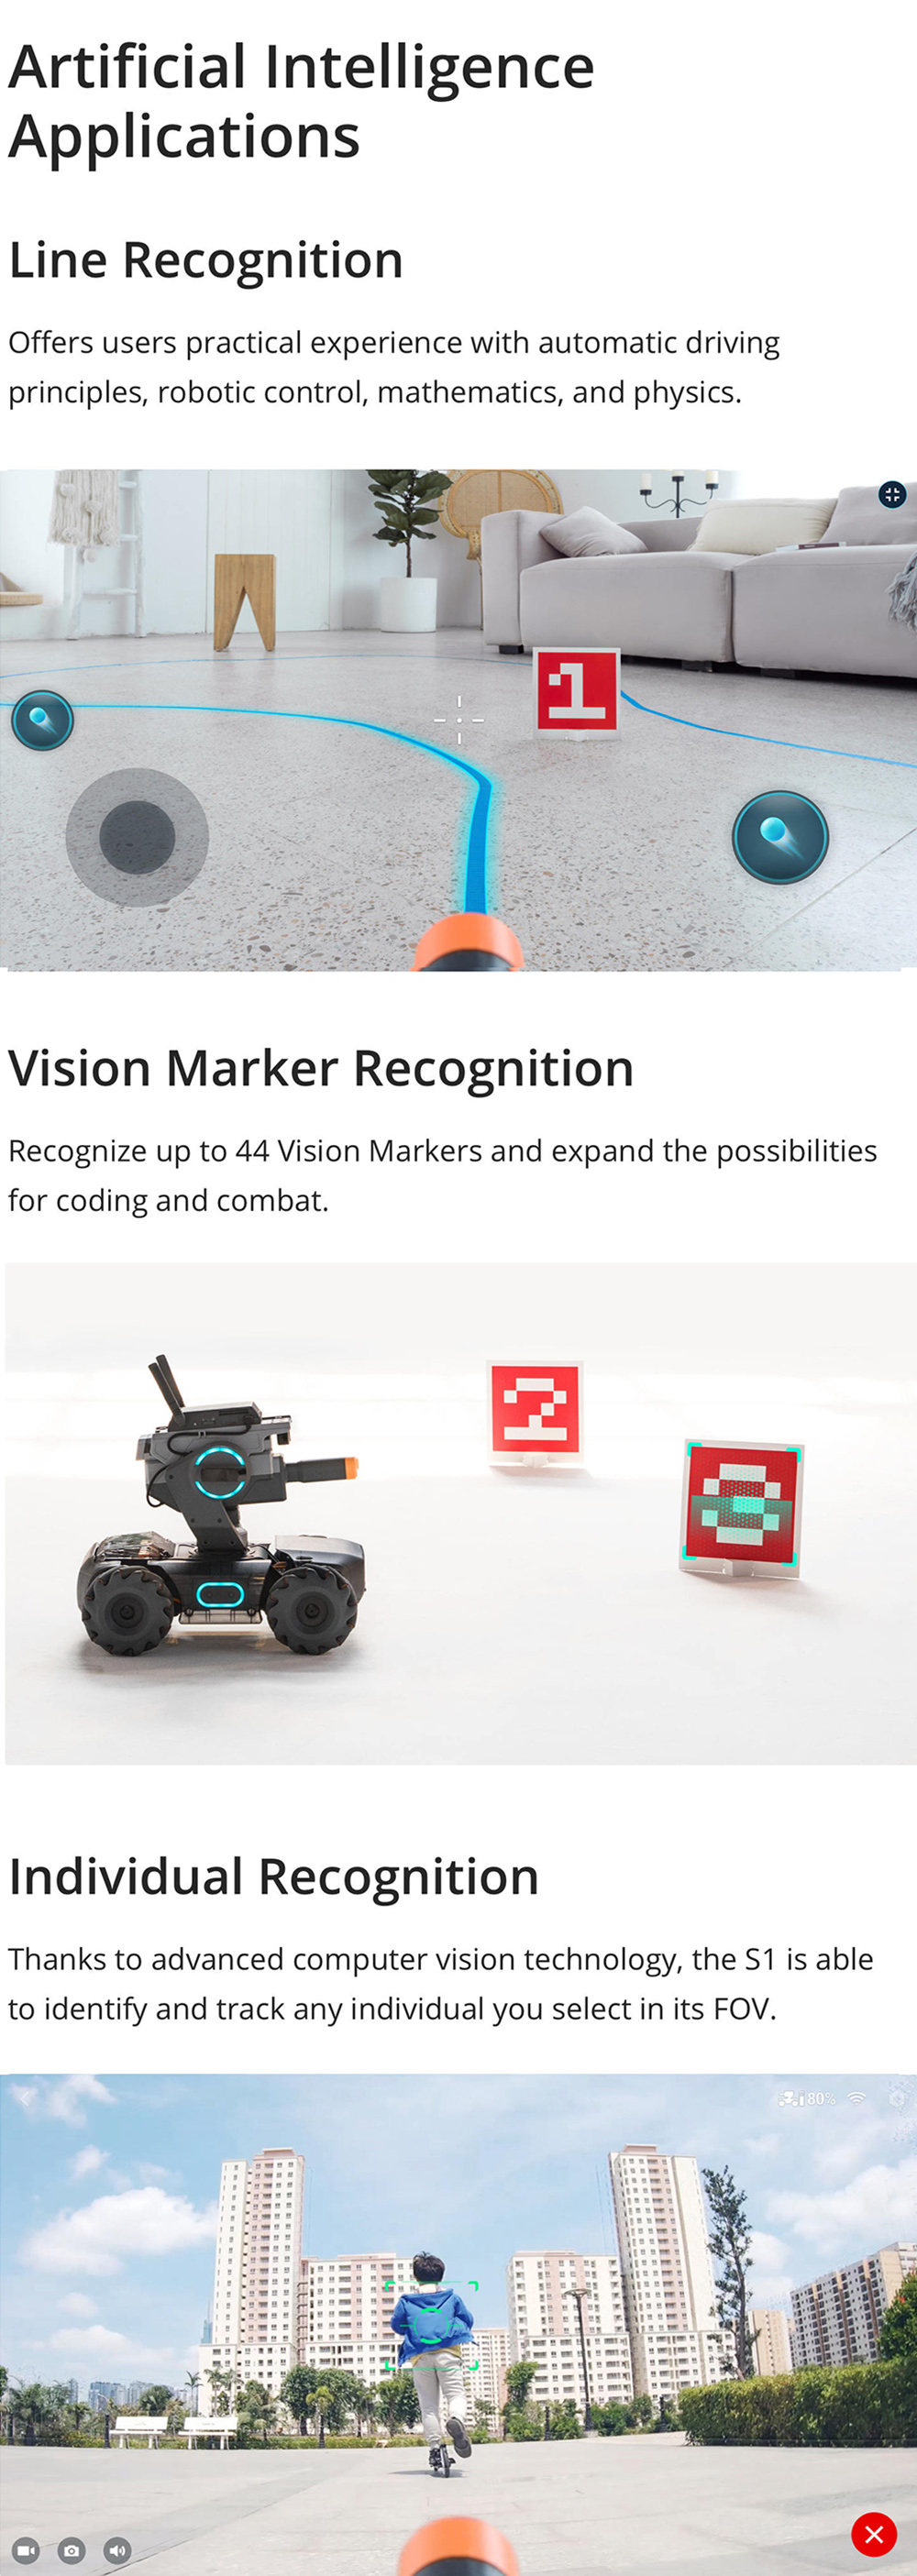 DJI Robomaster S1 STEAM DIY 4WD Brushless HD FPV APP Control Intelligent Educational Robot With AI Modules Support Scratch 3.0 Python Program - Photo: 5